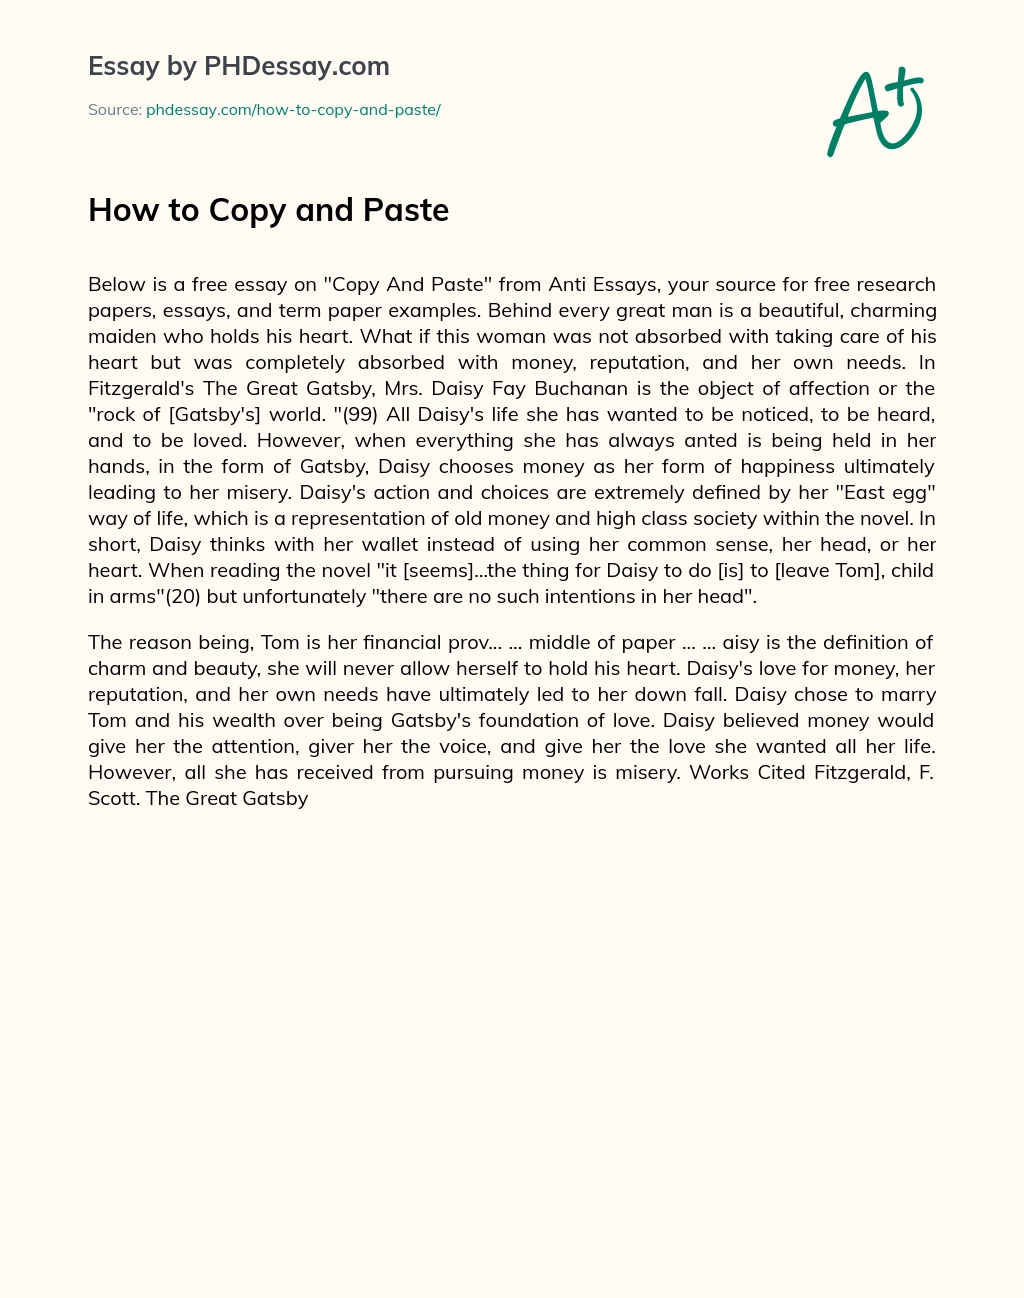 How to Copy and Paste essay